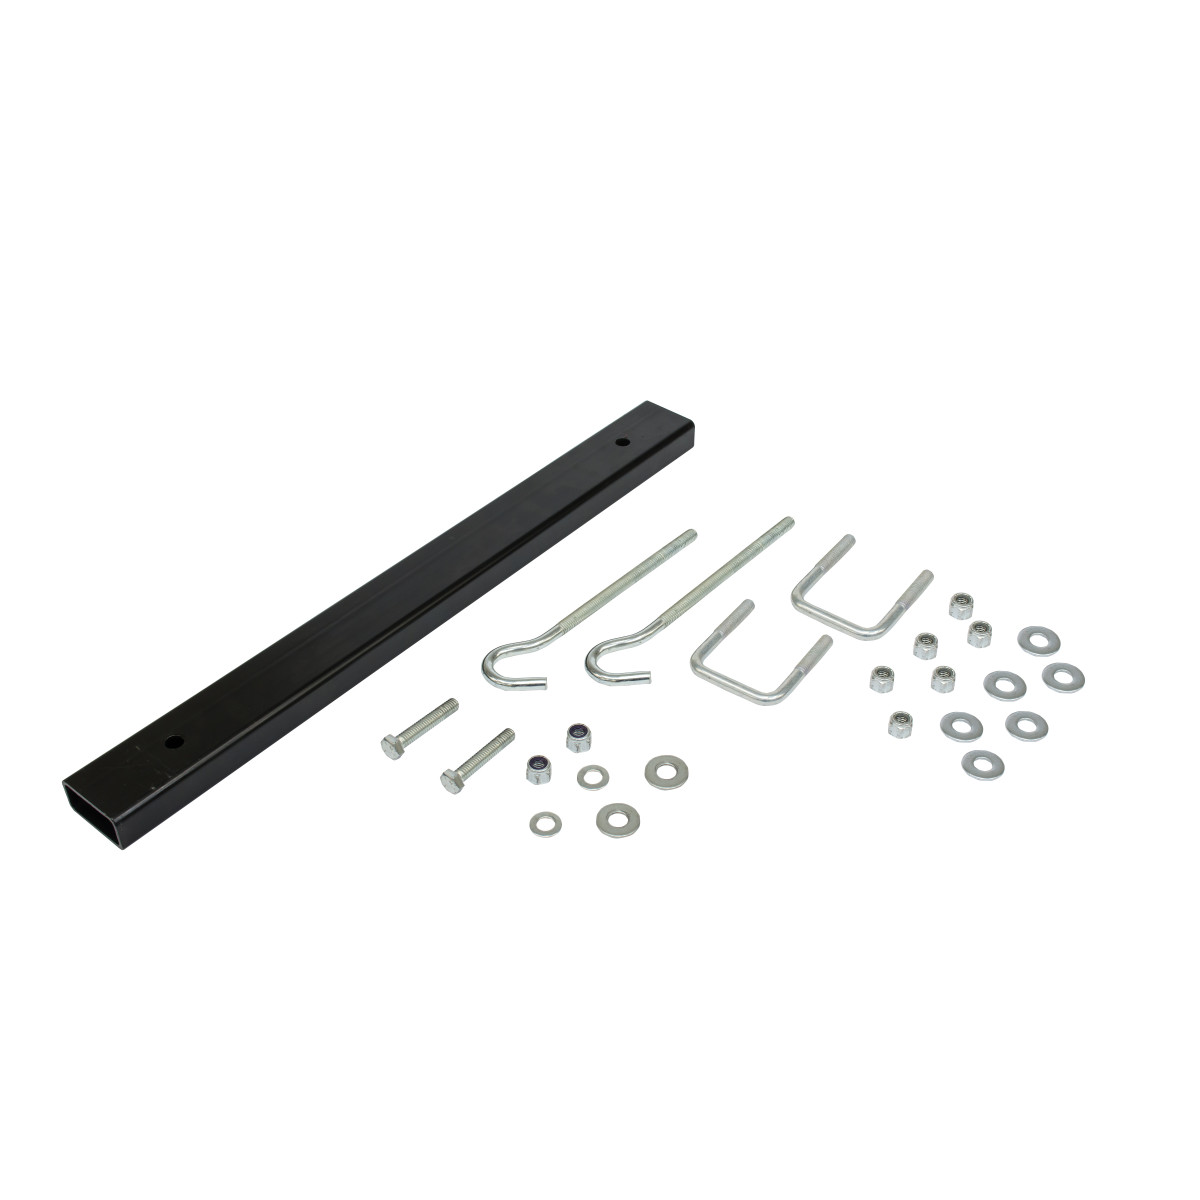 Workhorse™ Bender Mounting Kit for use with 555CX and 555c.  2 